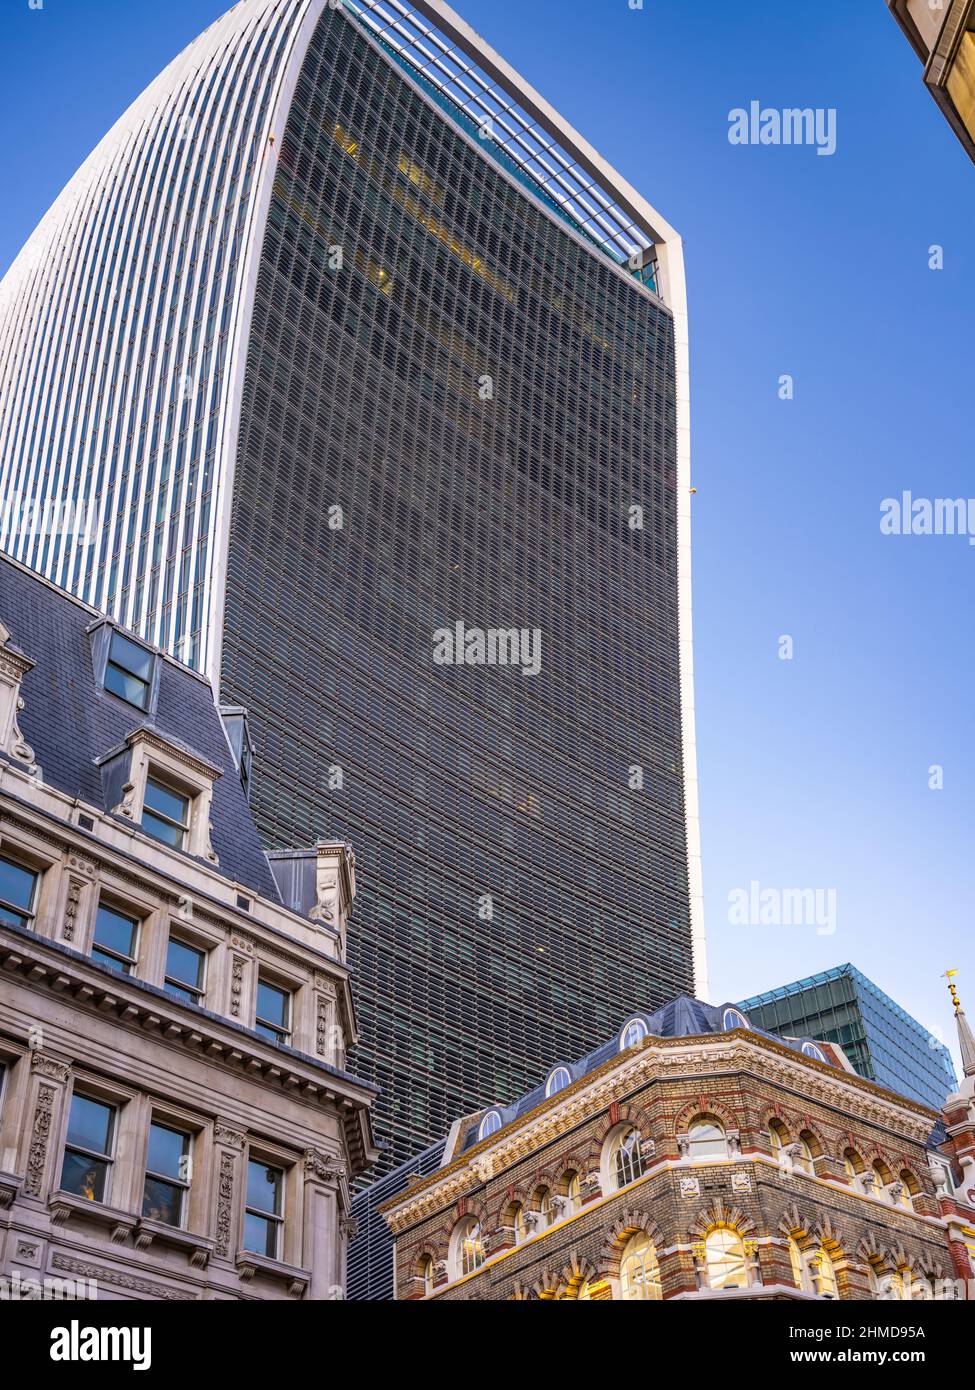 The Walkie-Talkie, Fenchurch Building, traditional Eastcheap building in the foreground. Stock Photo